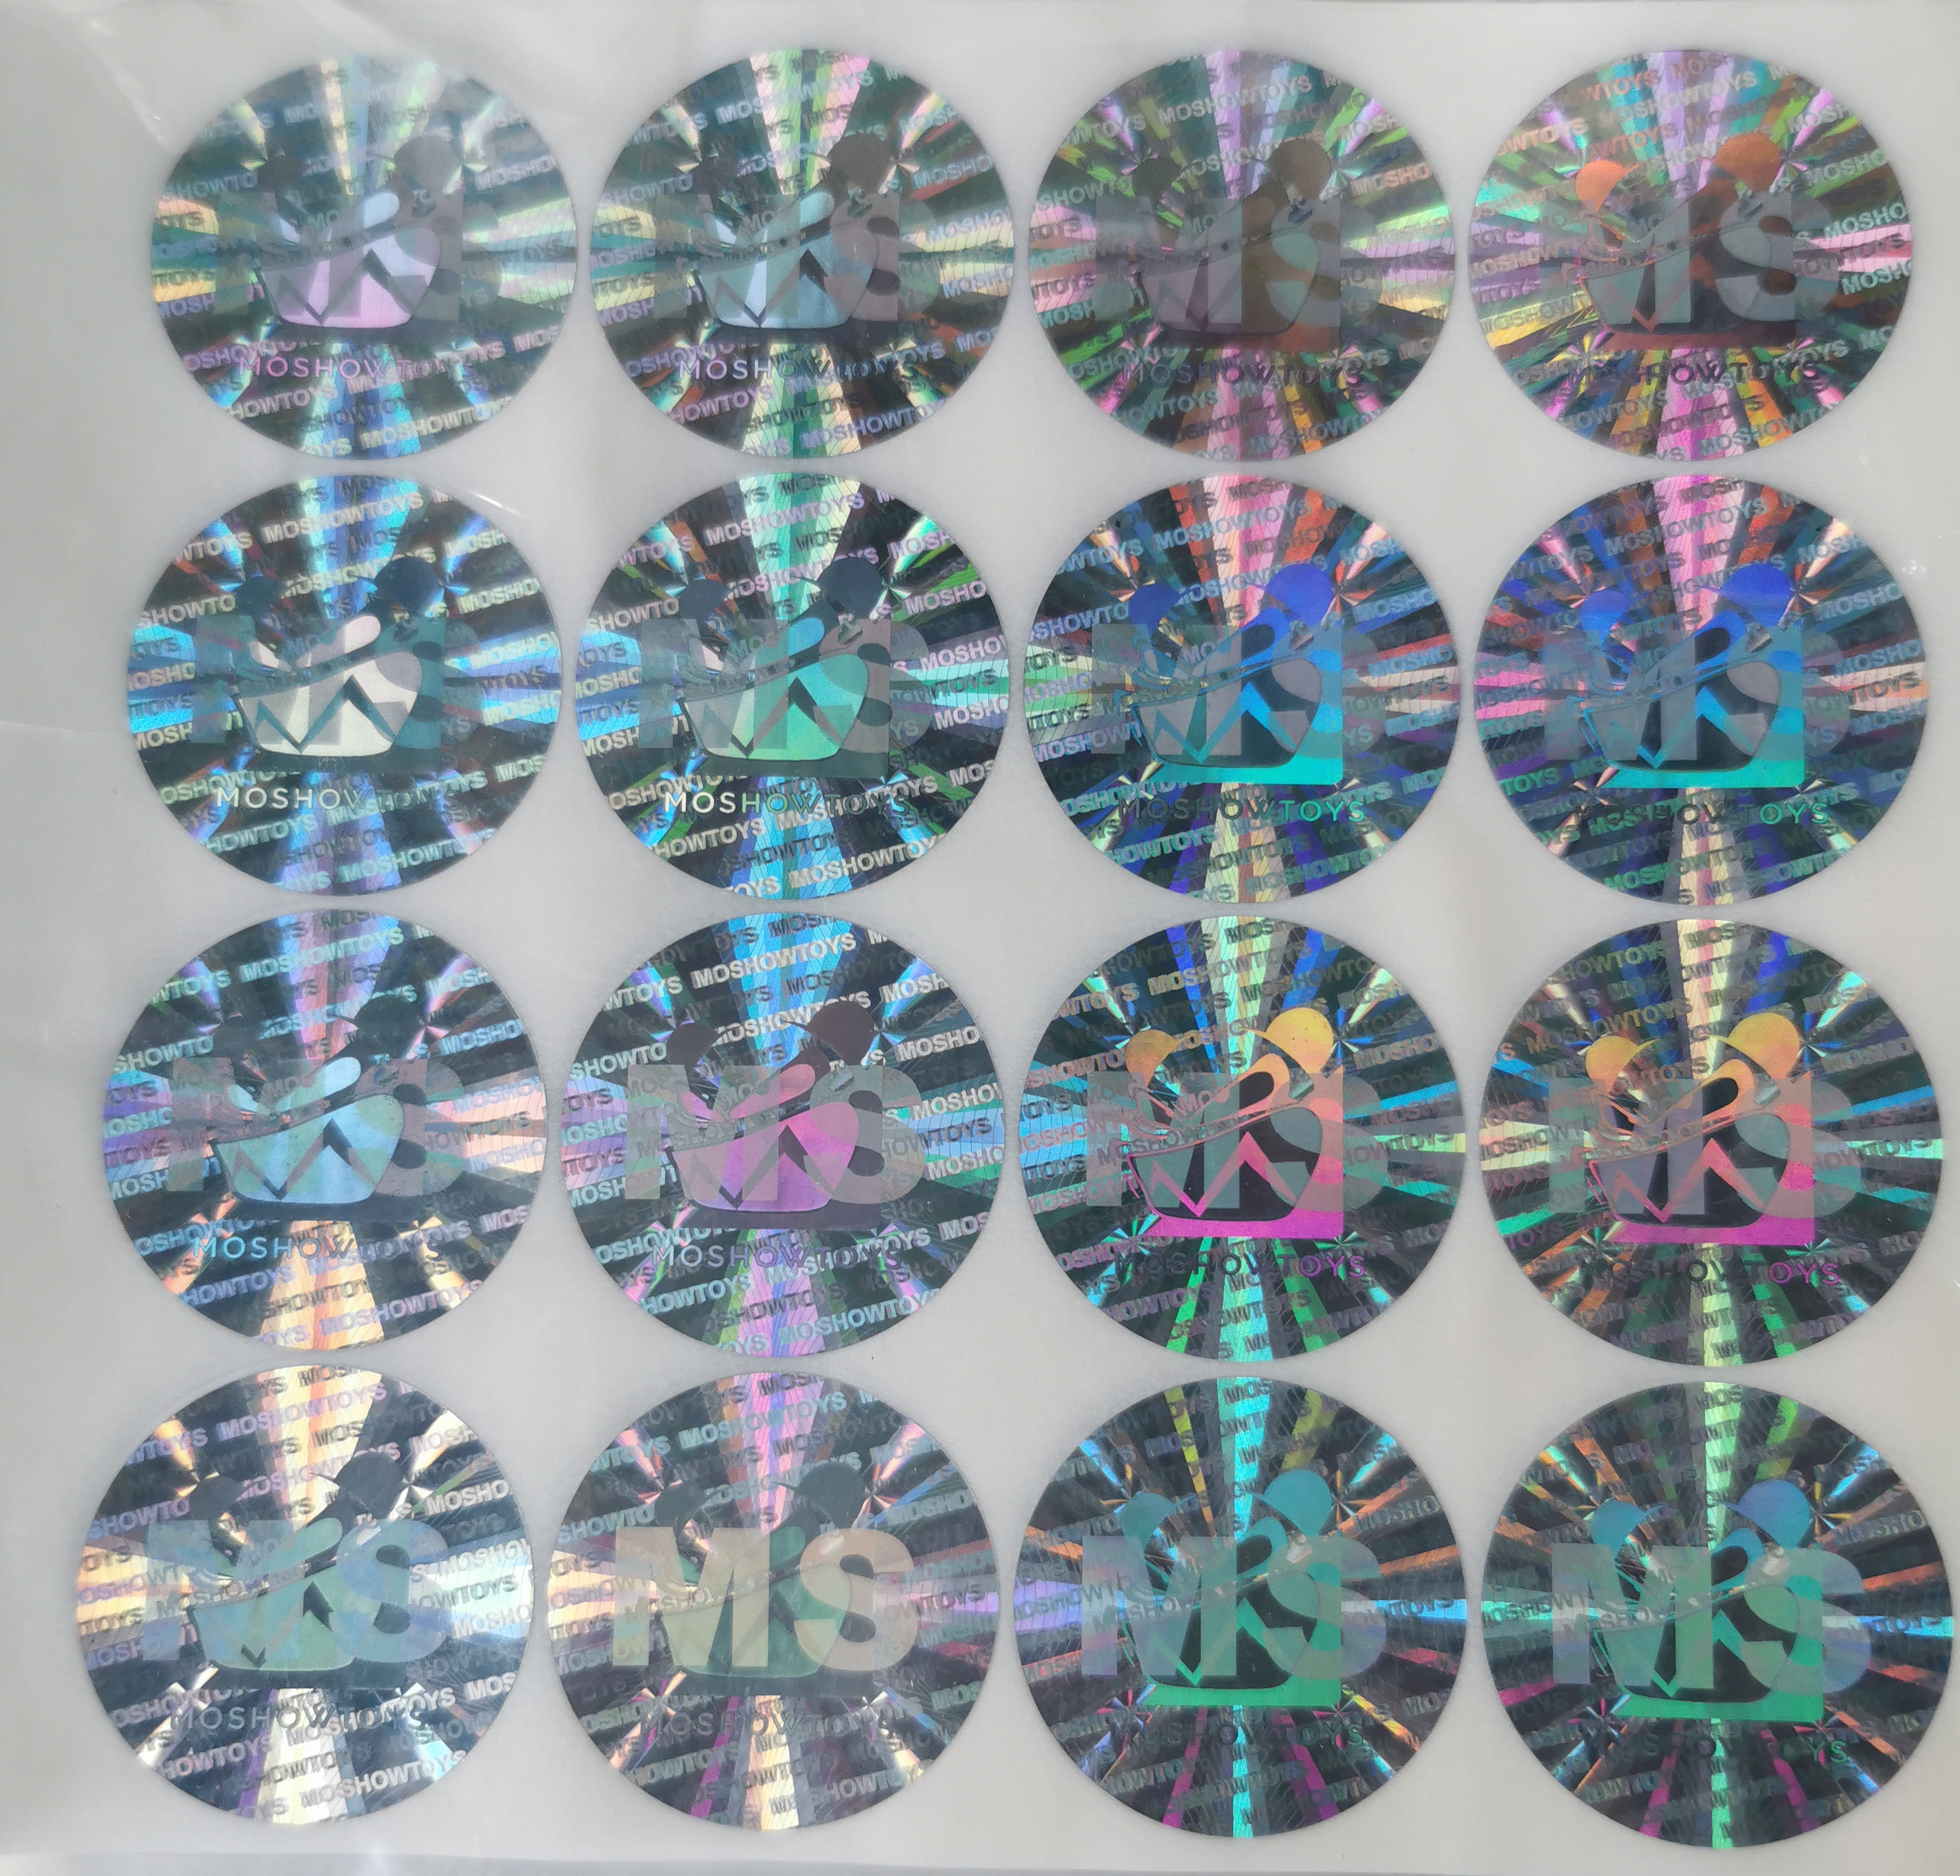 Dual channel holographic sticker